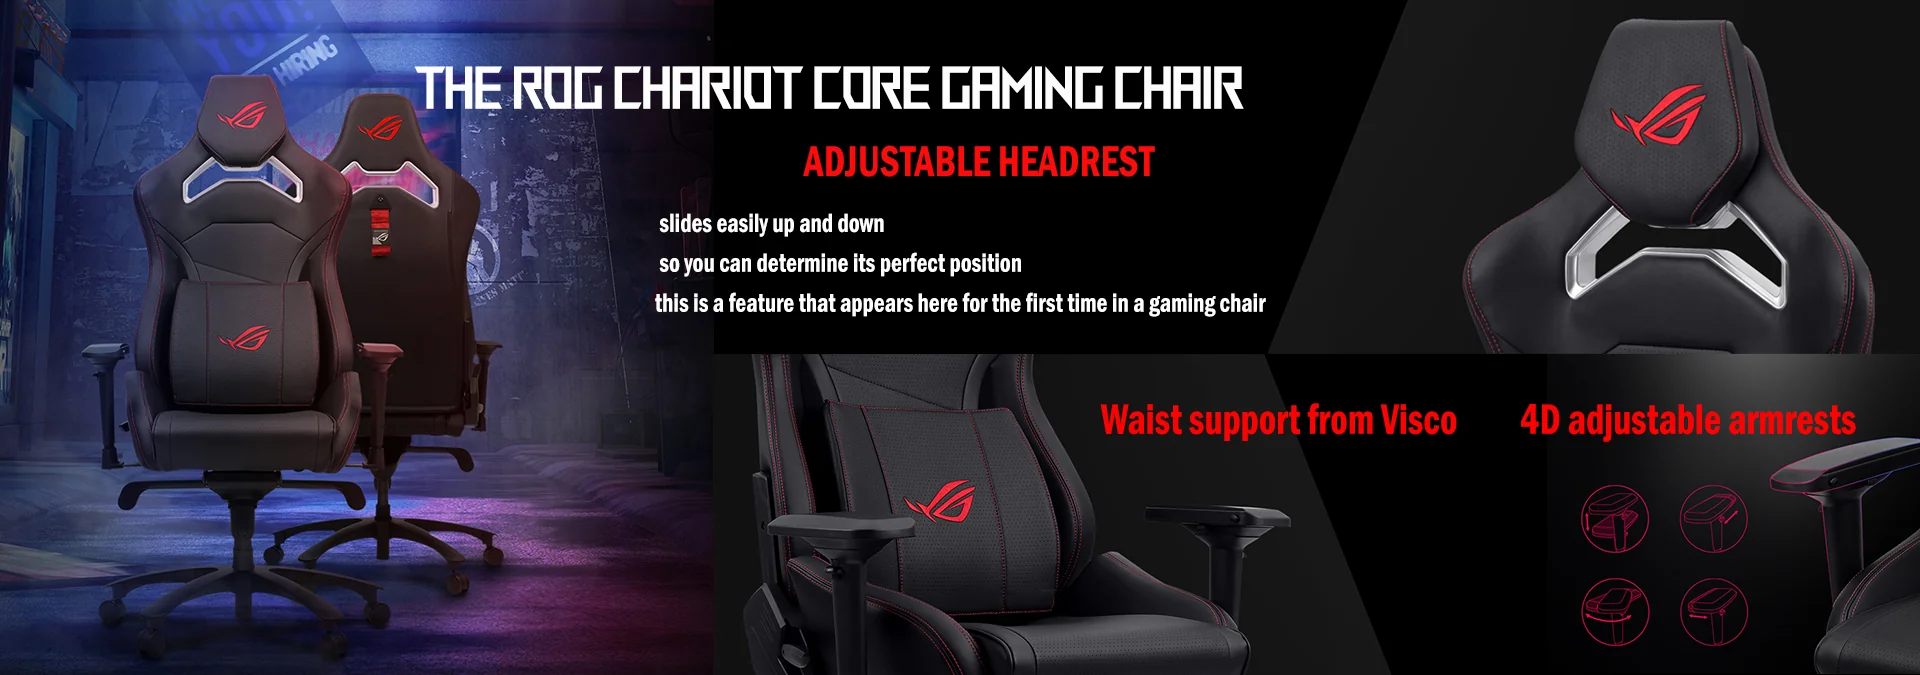 Rog Chariot Core Banner